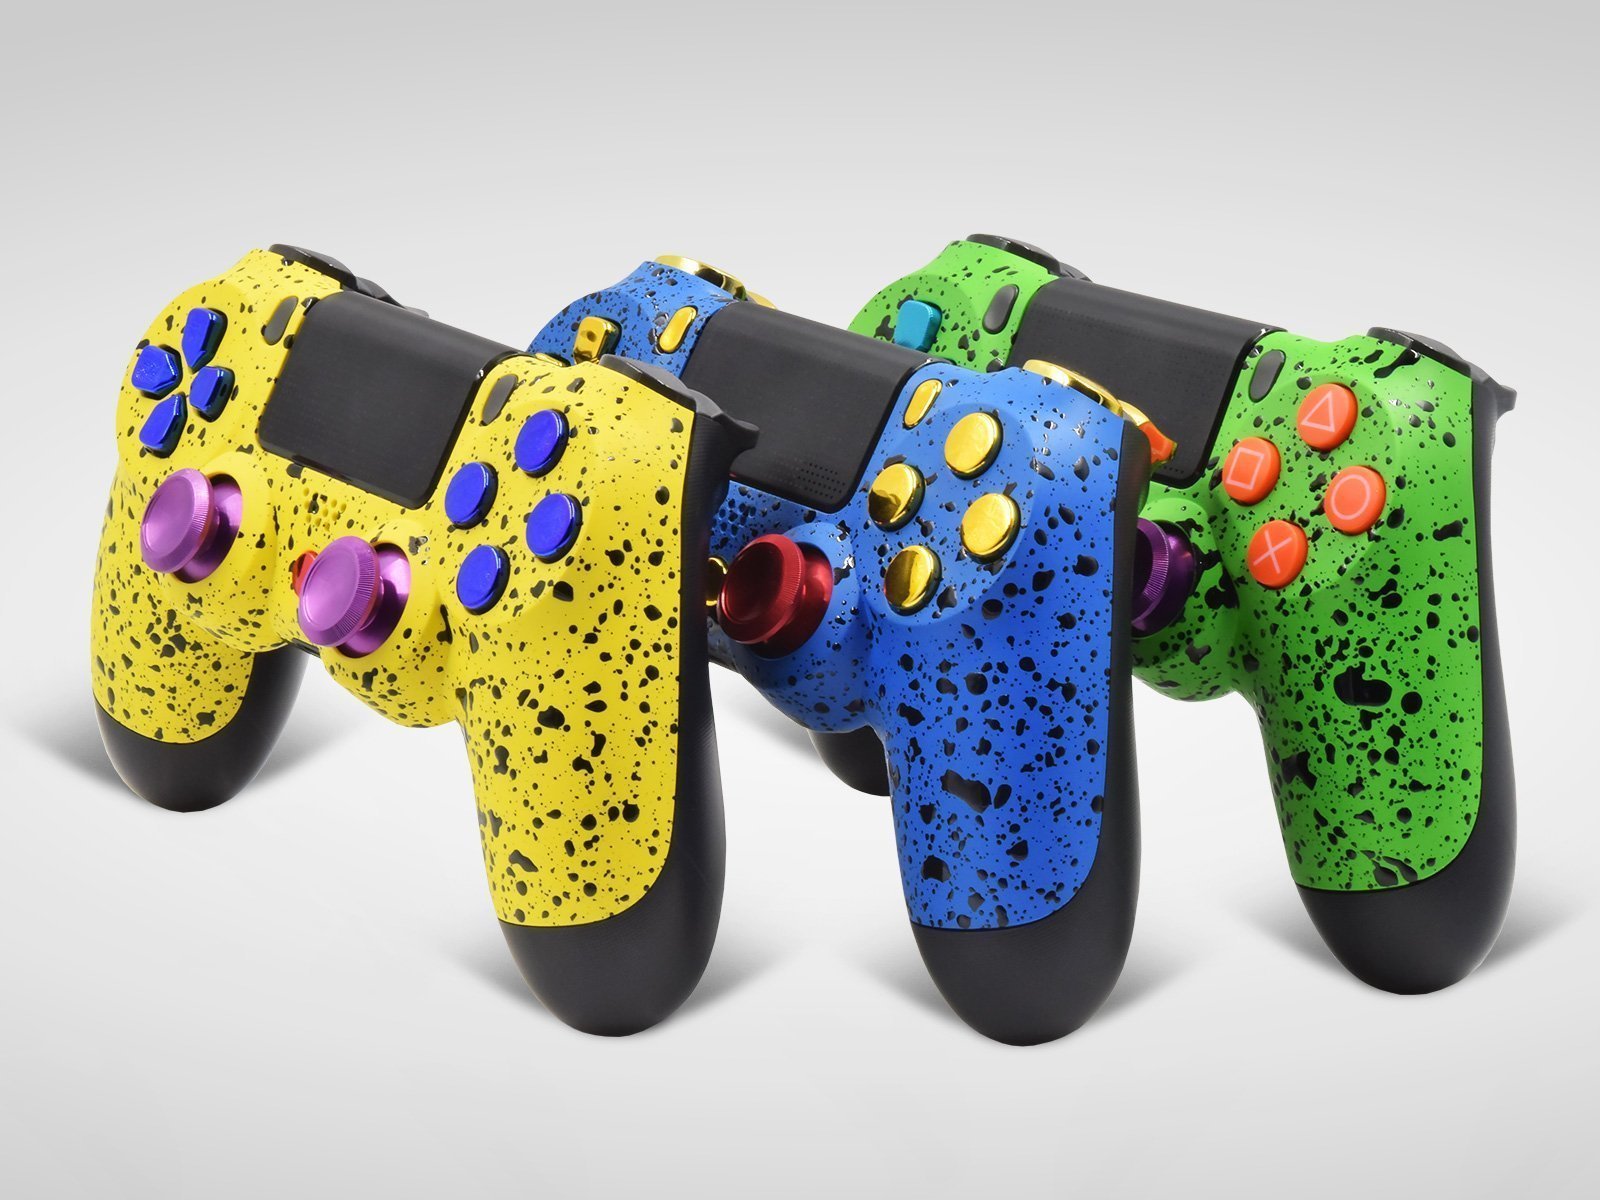 Design Ps4 Controller With Pictures Lewisburg District Umc